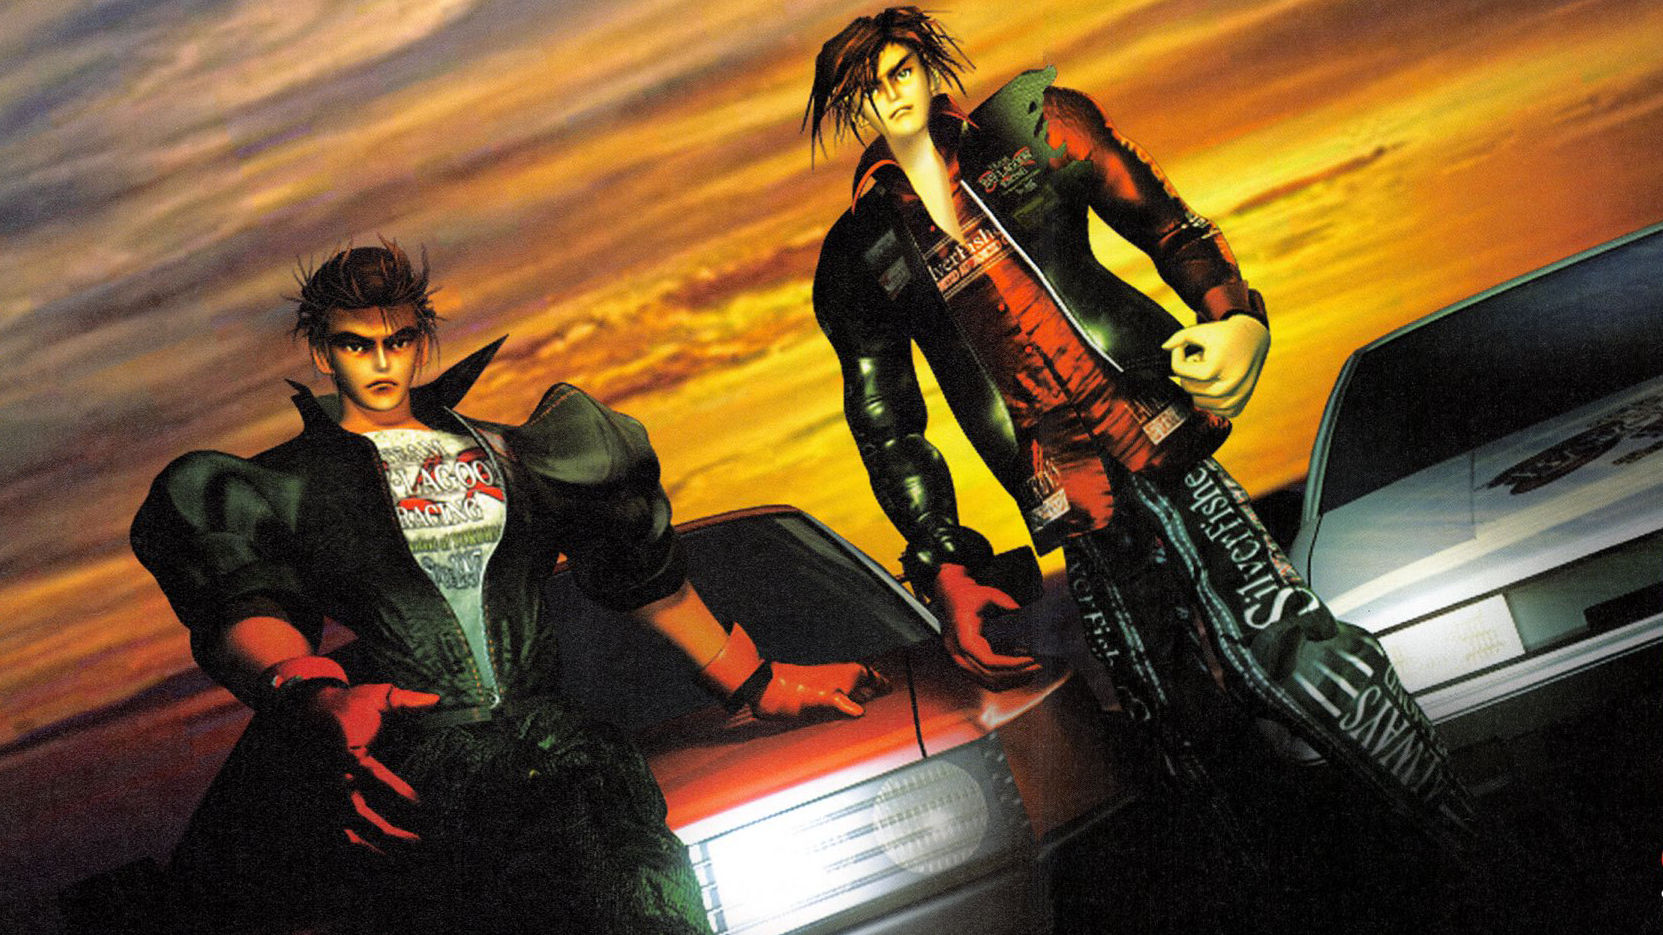 Racing Lagoon artwork of two men in street racing gear leaning against their sports cars at sunset.